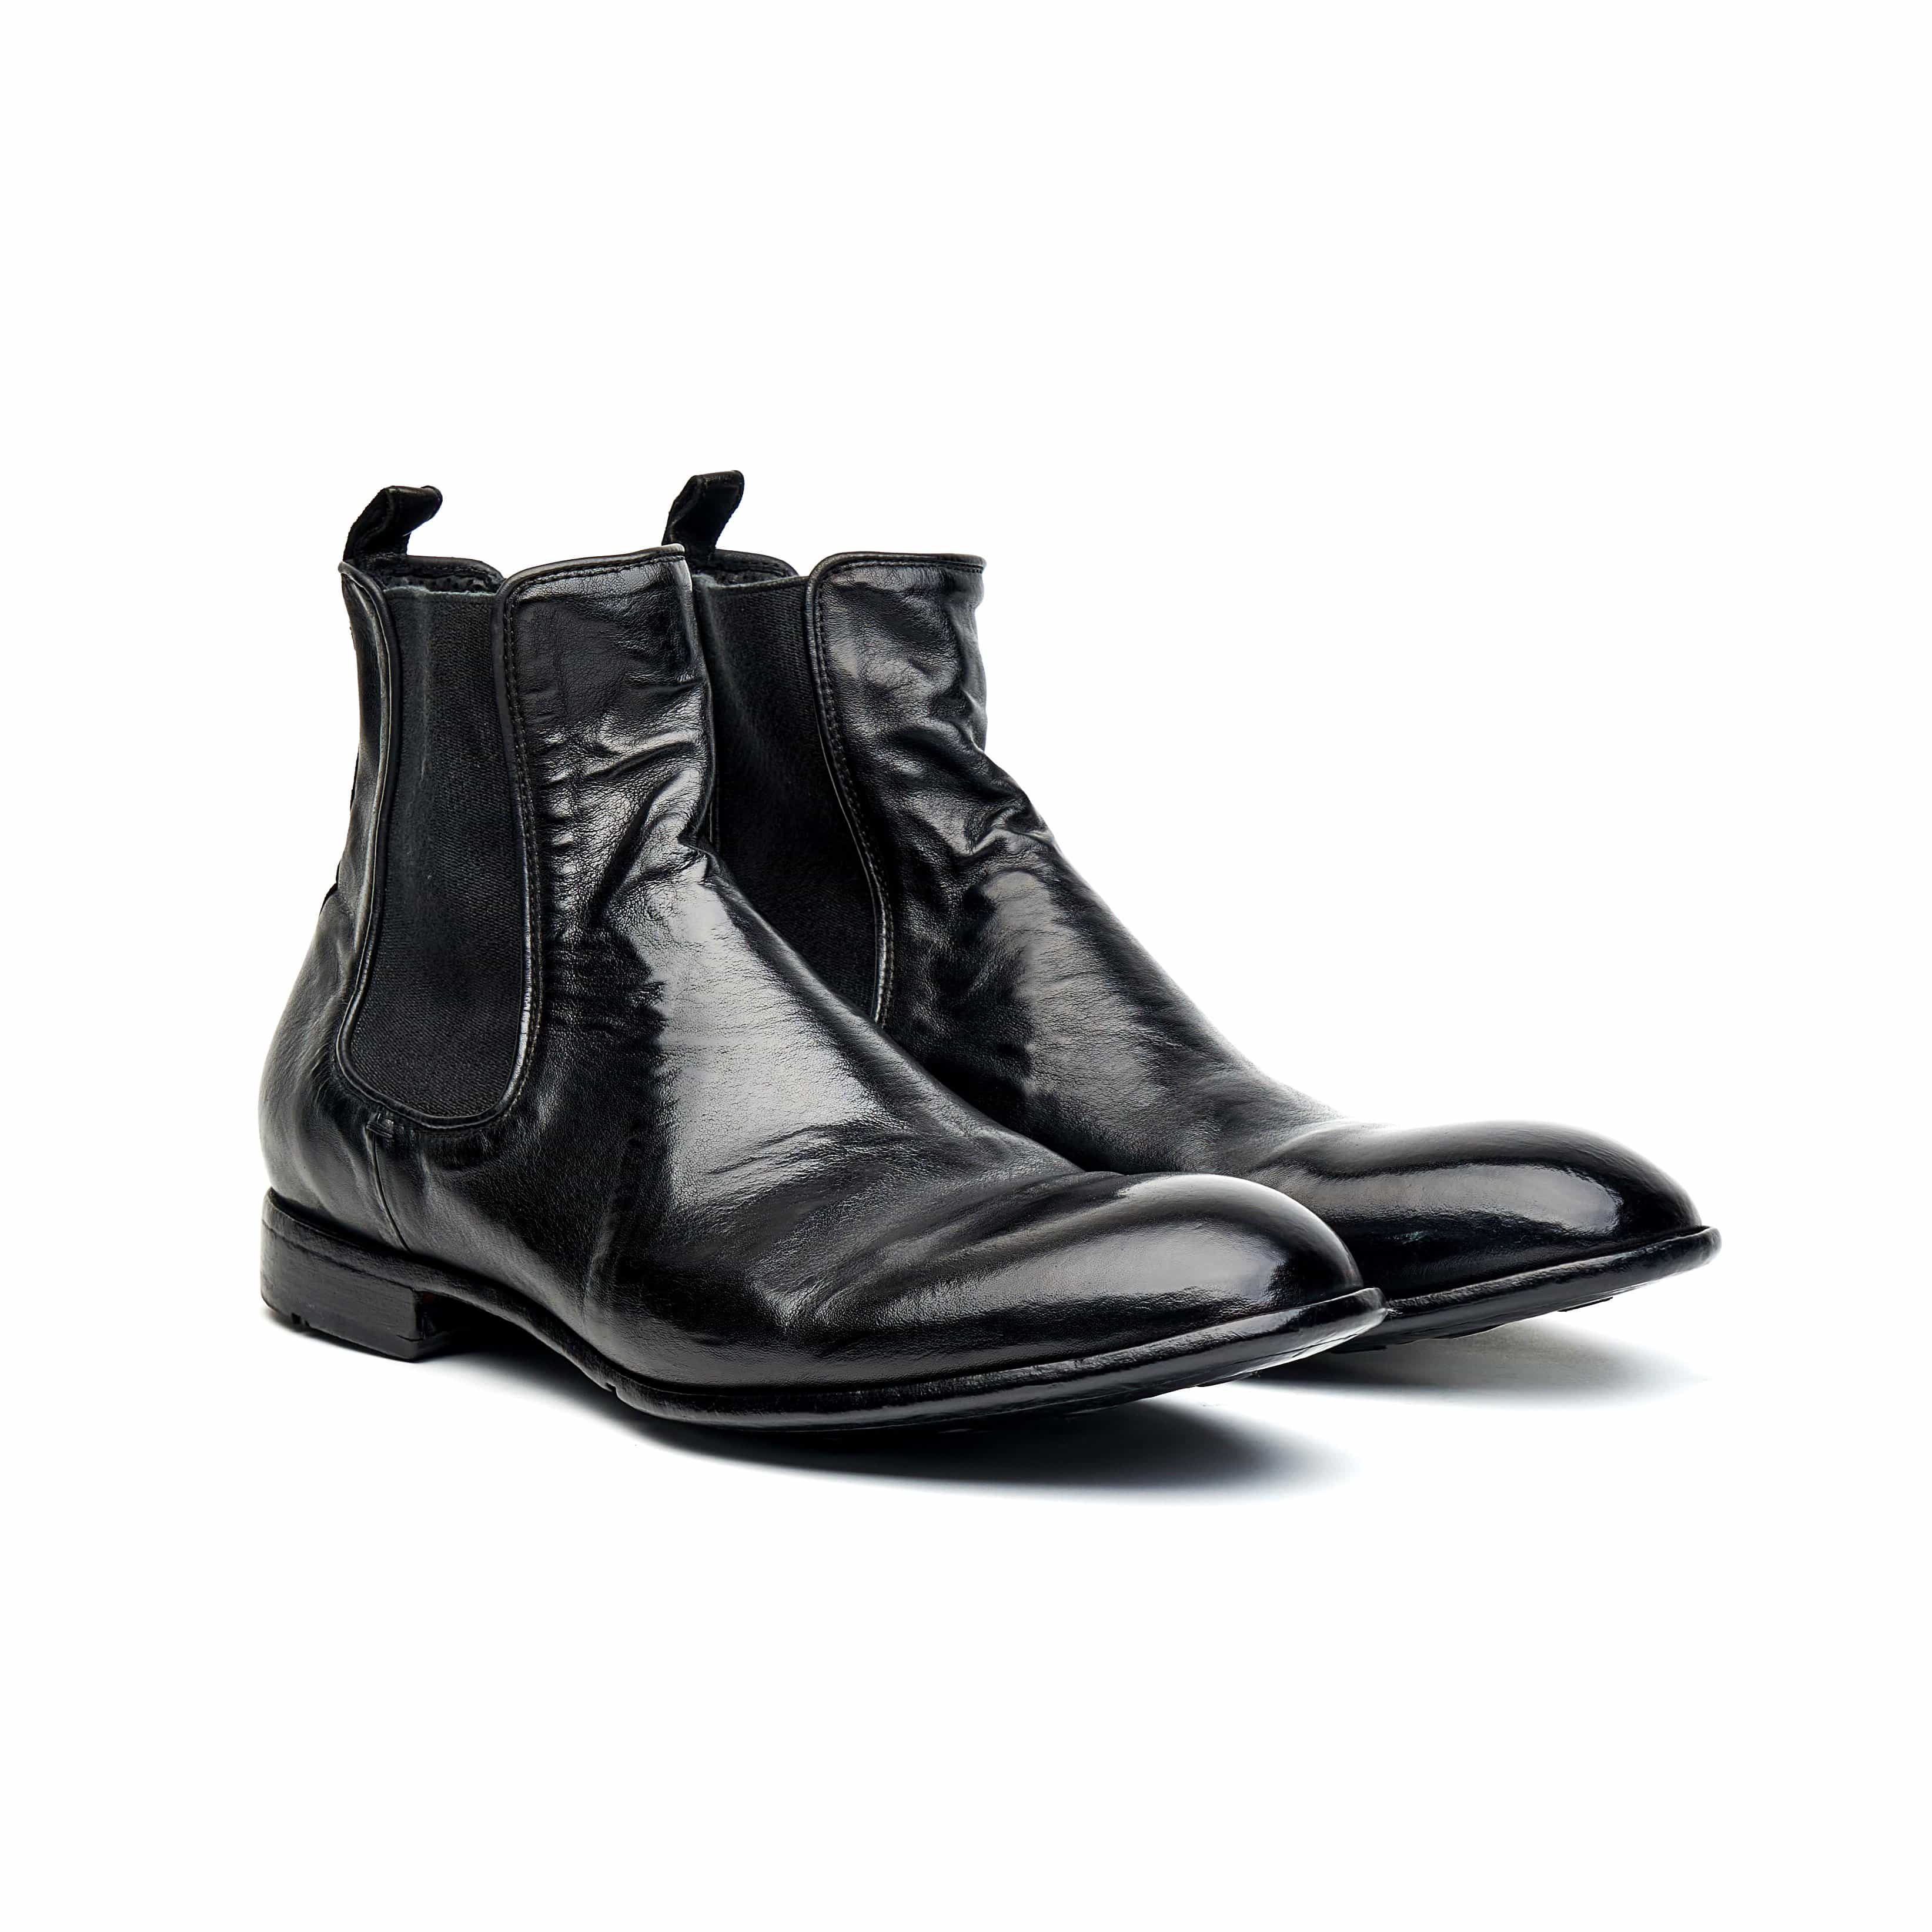 Lemargo CZ07A Chelsea Boot - 124 Shoes